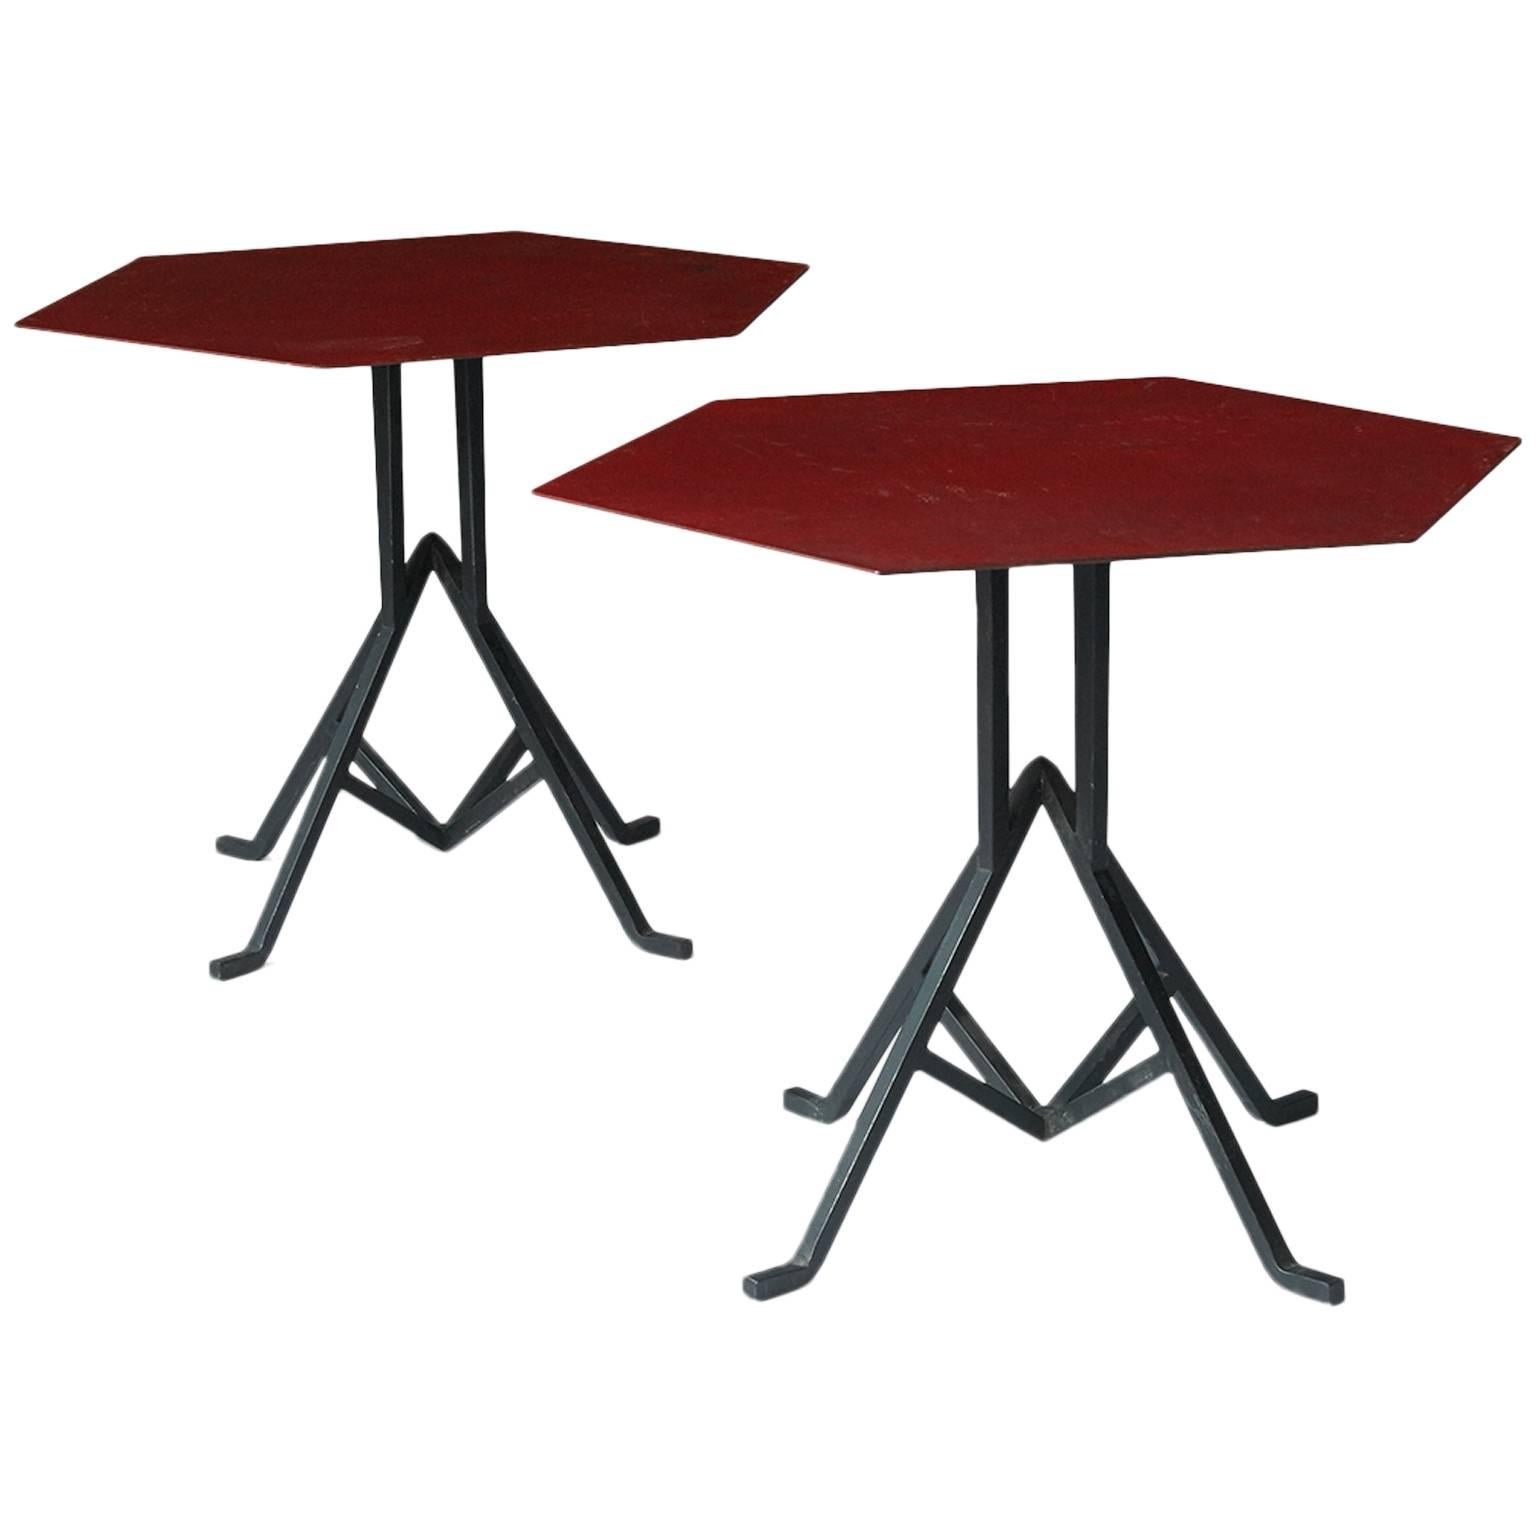 Pair of Warren McArthur and Frank Lloyd Wright Iron Side Tables